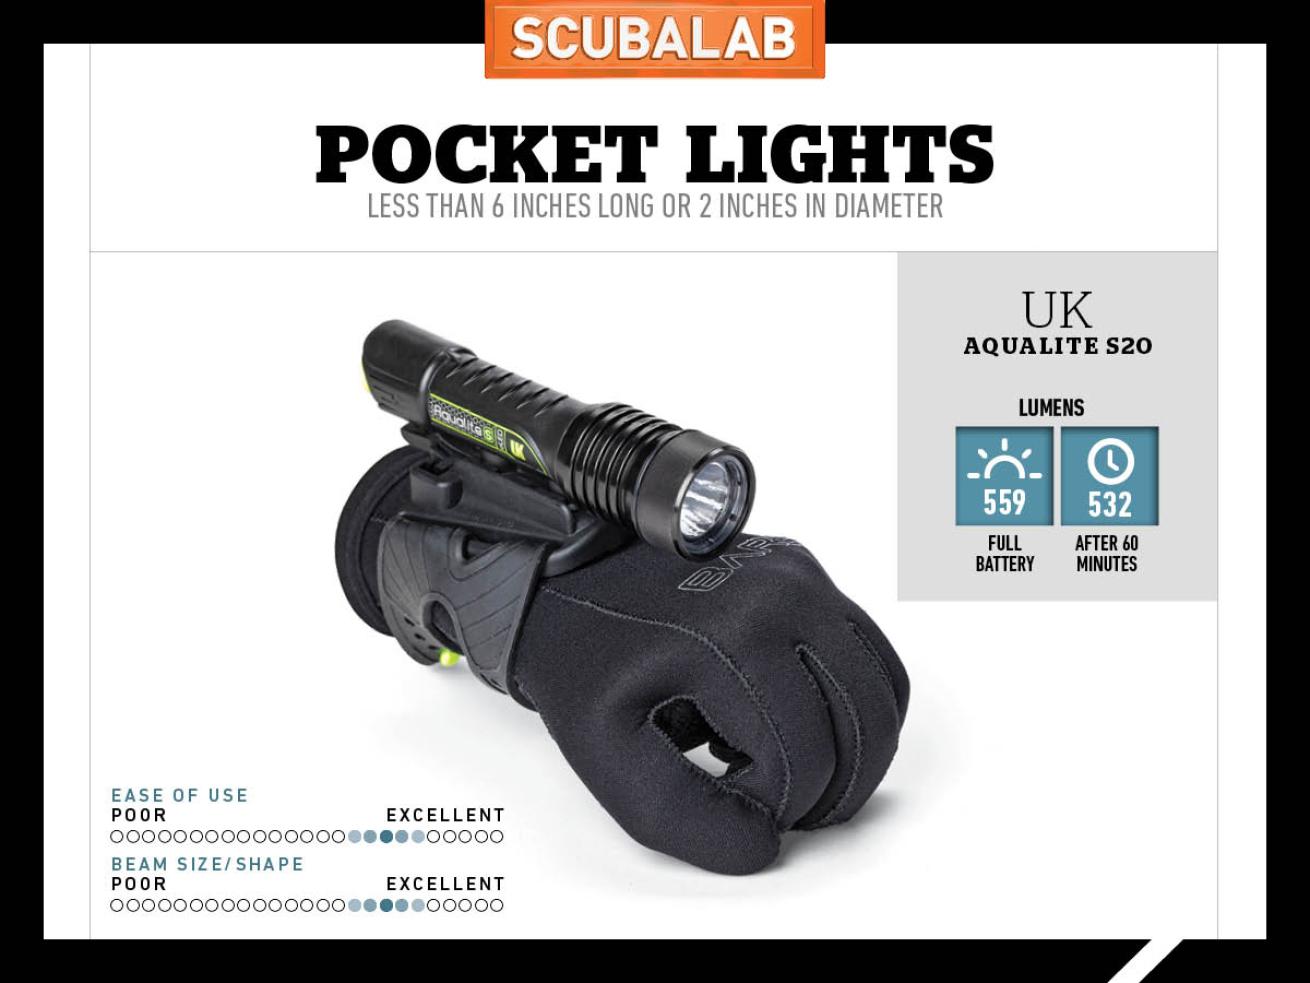 UK Aqualite S20 Dive Light Reviewed by ScubaLab